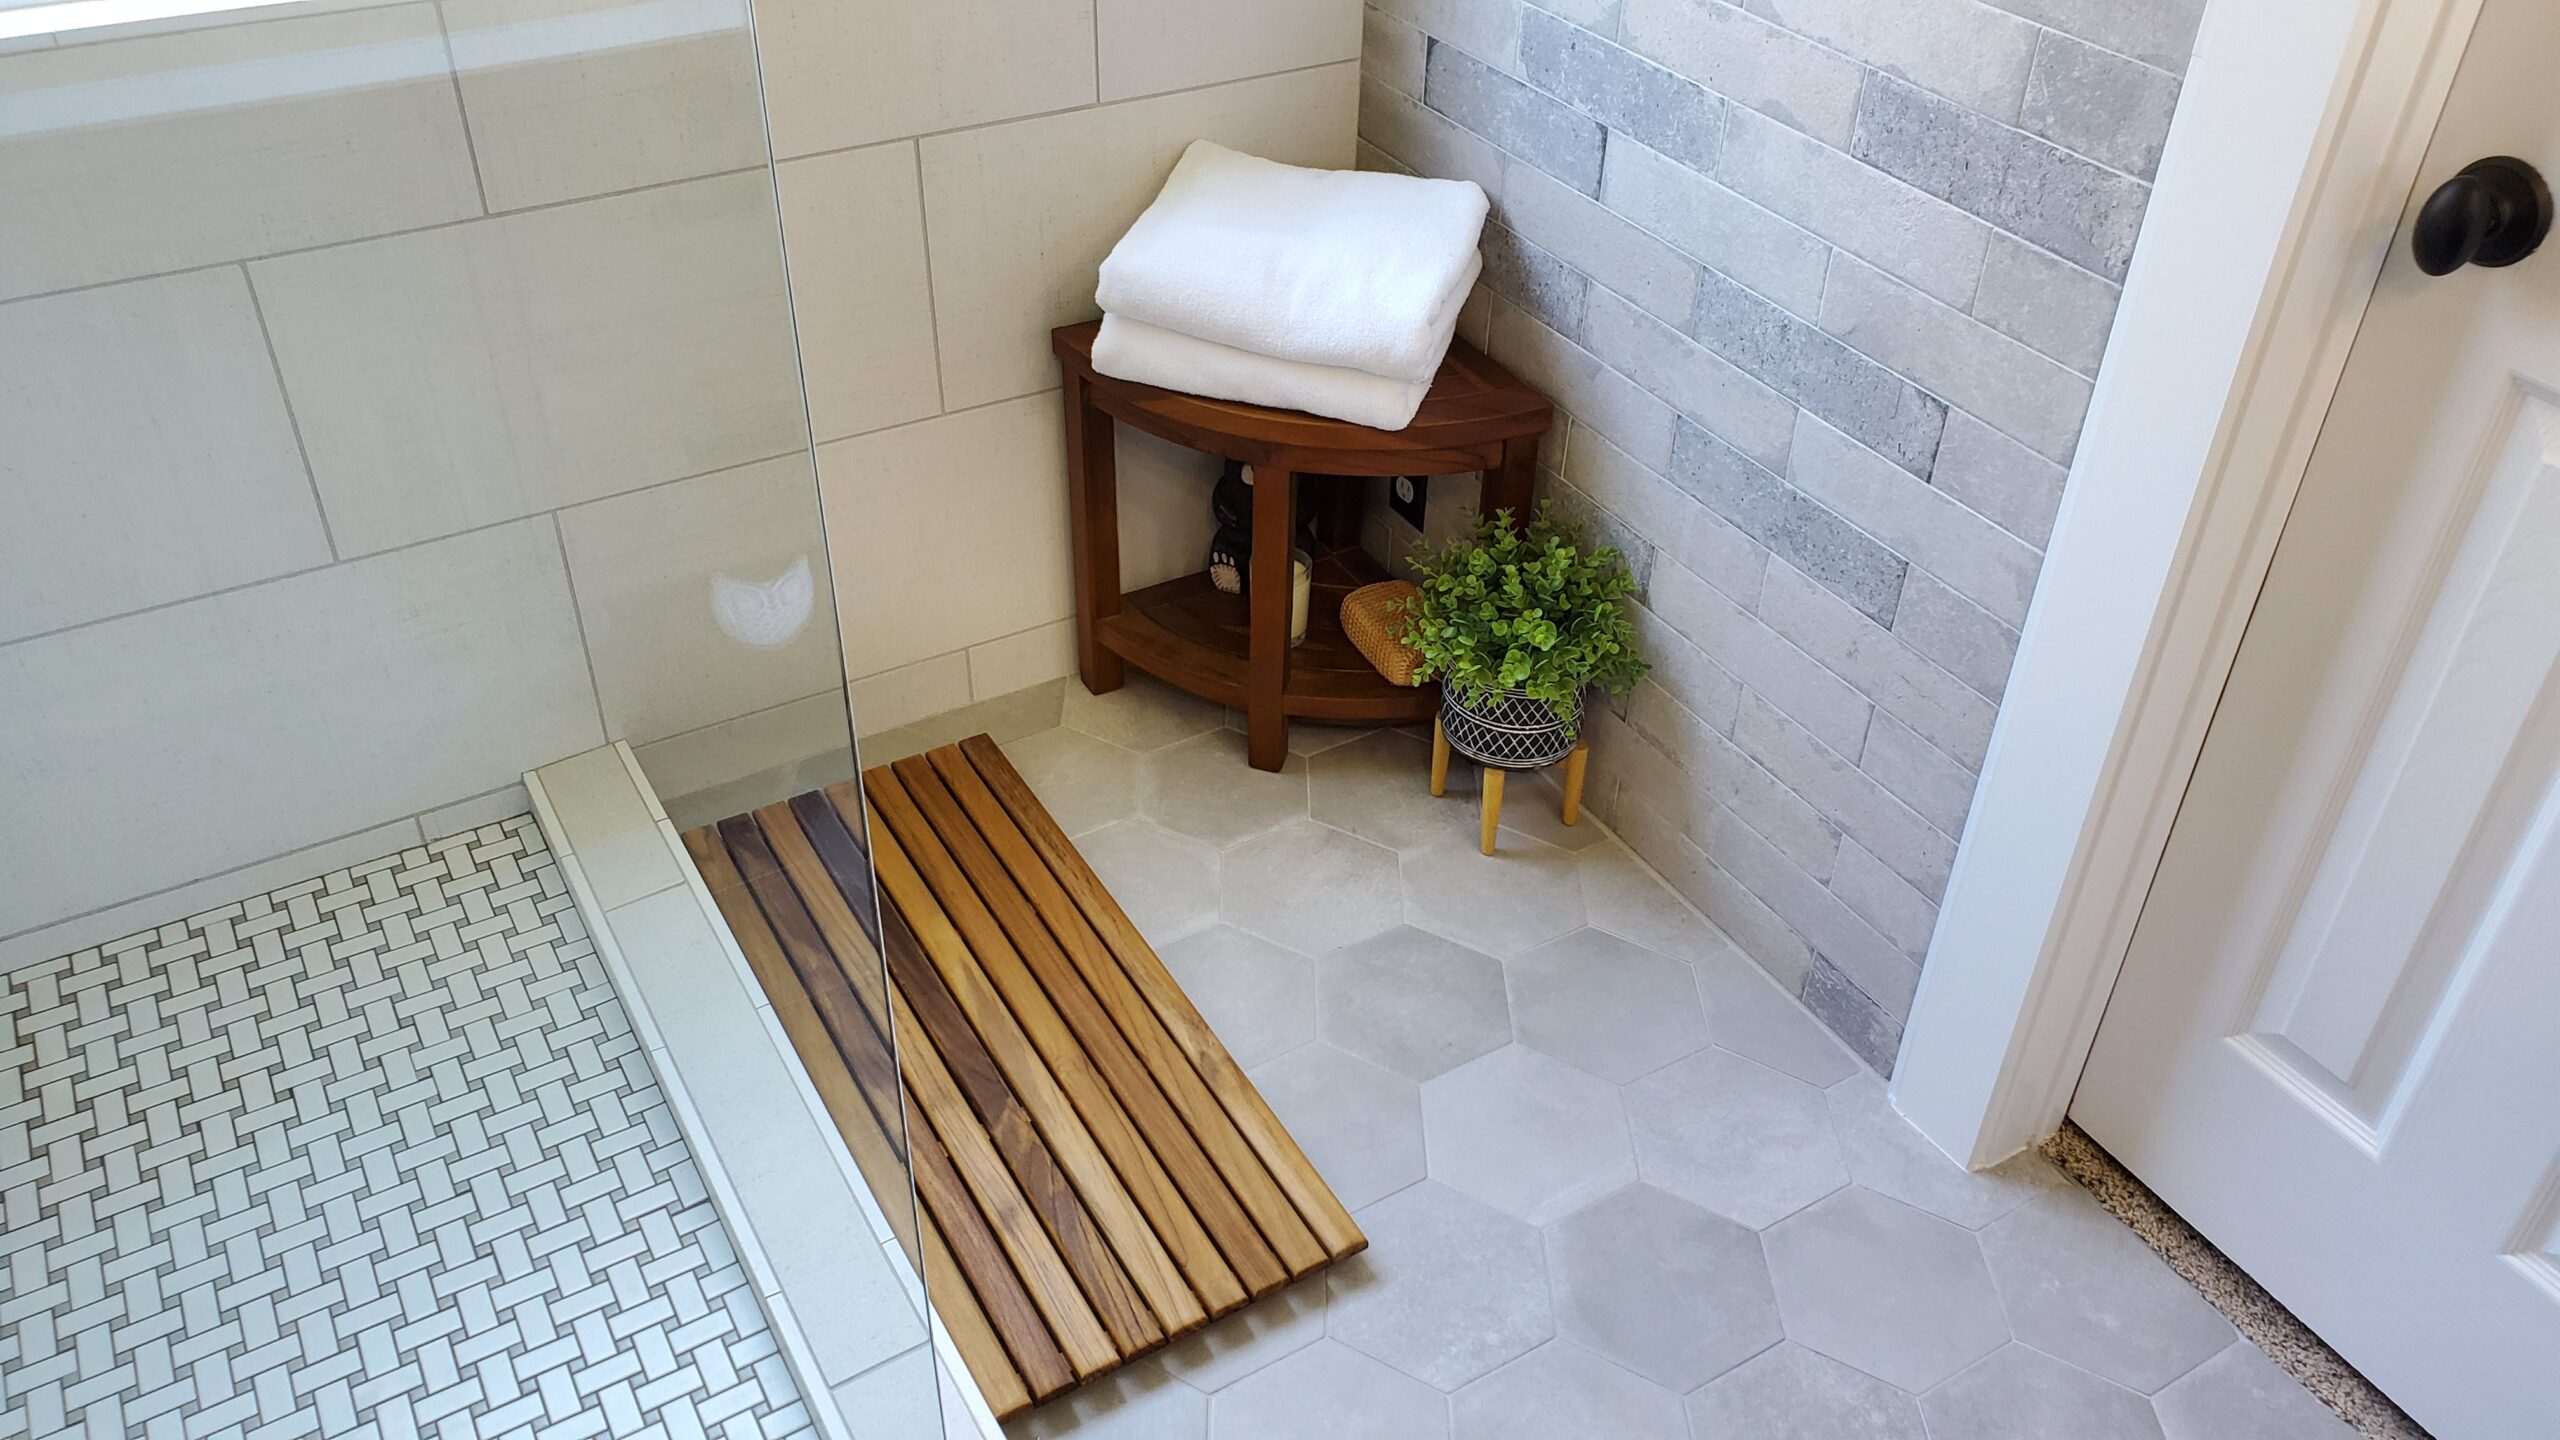 This is a dry-off area of a large tub-to-shower conversion we built in 2019.